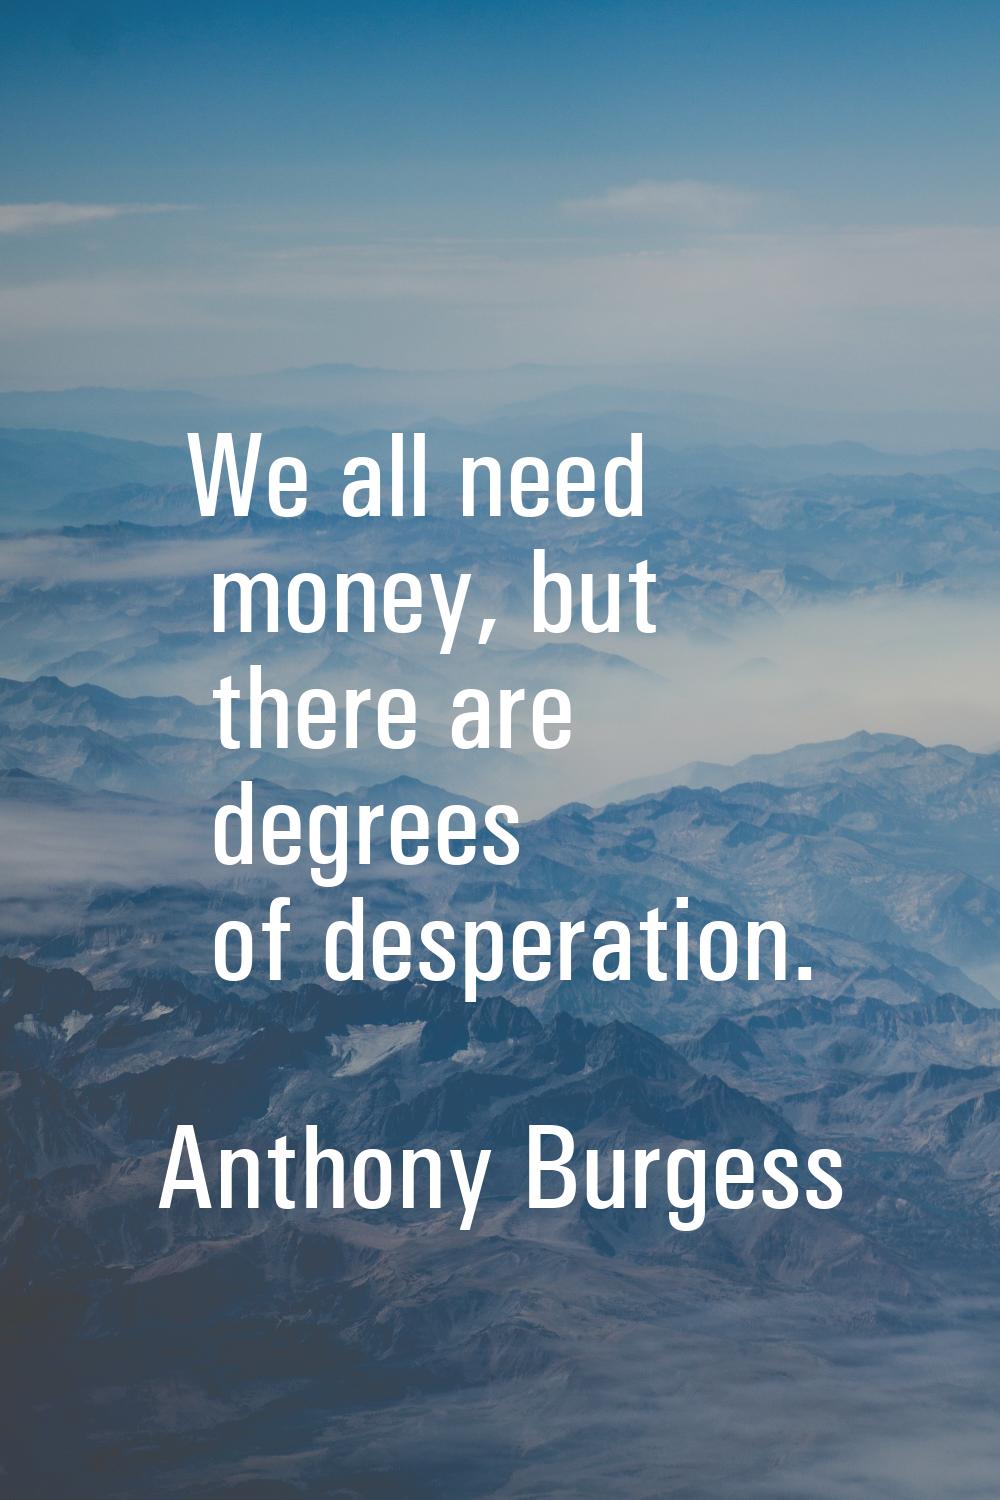 We all need money, but there are degrees of desperation.